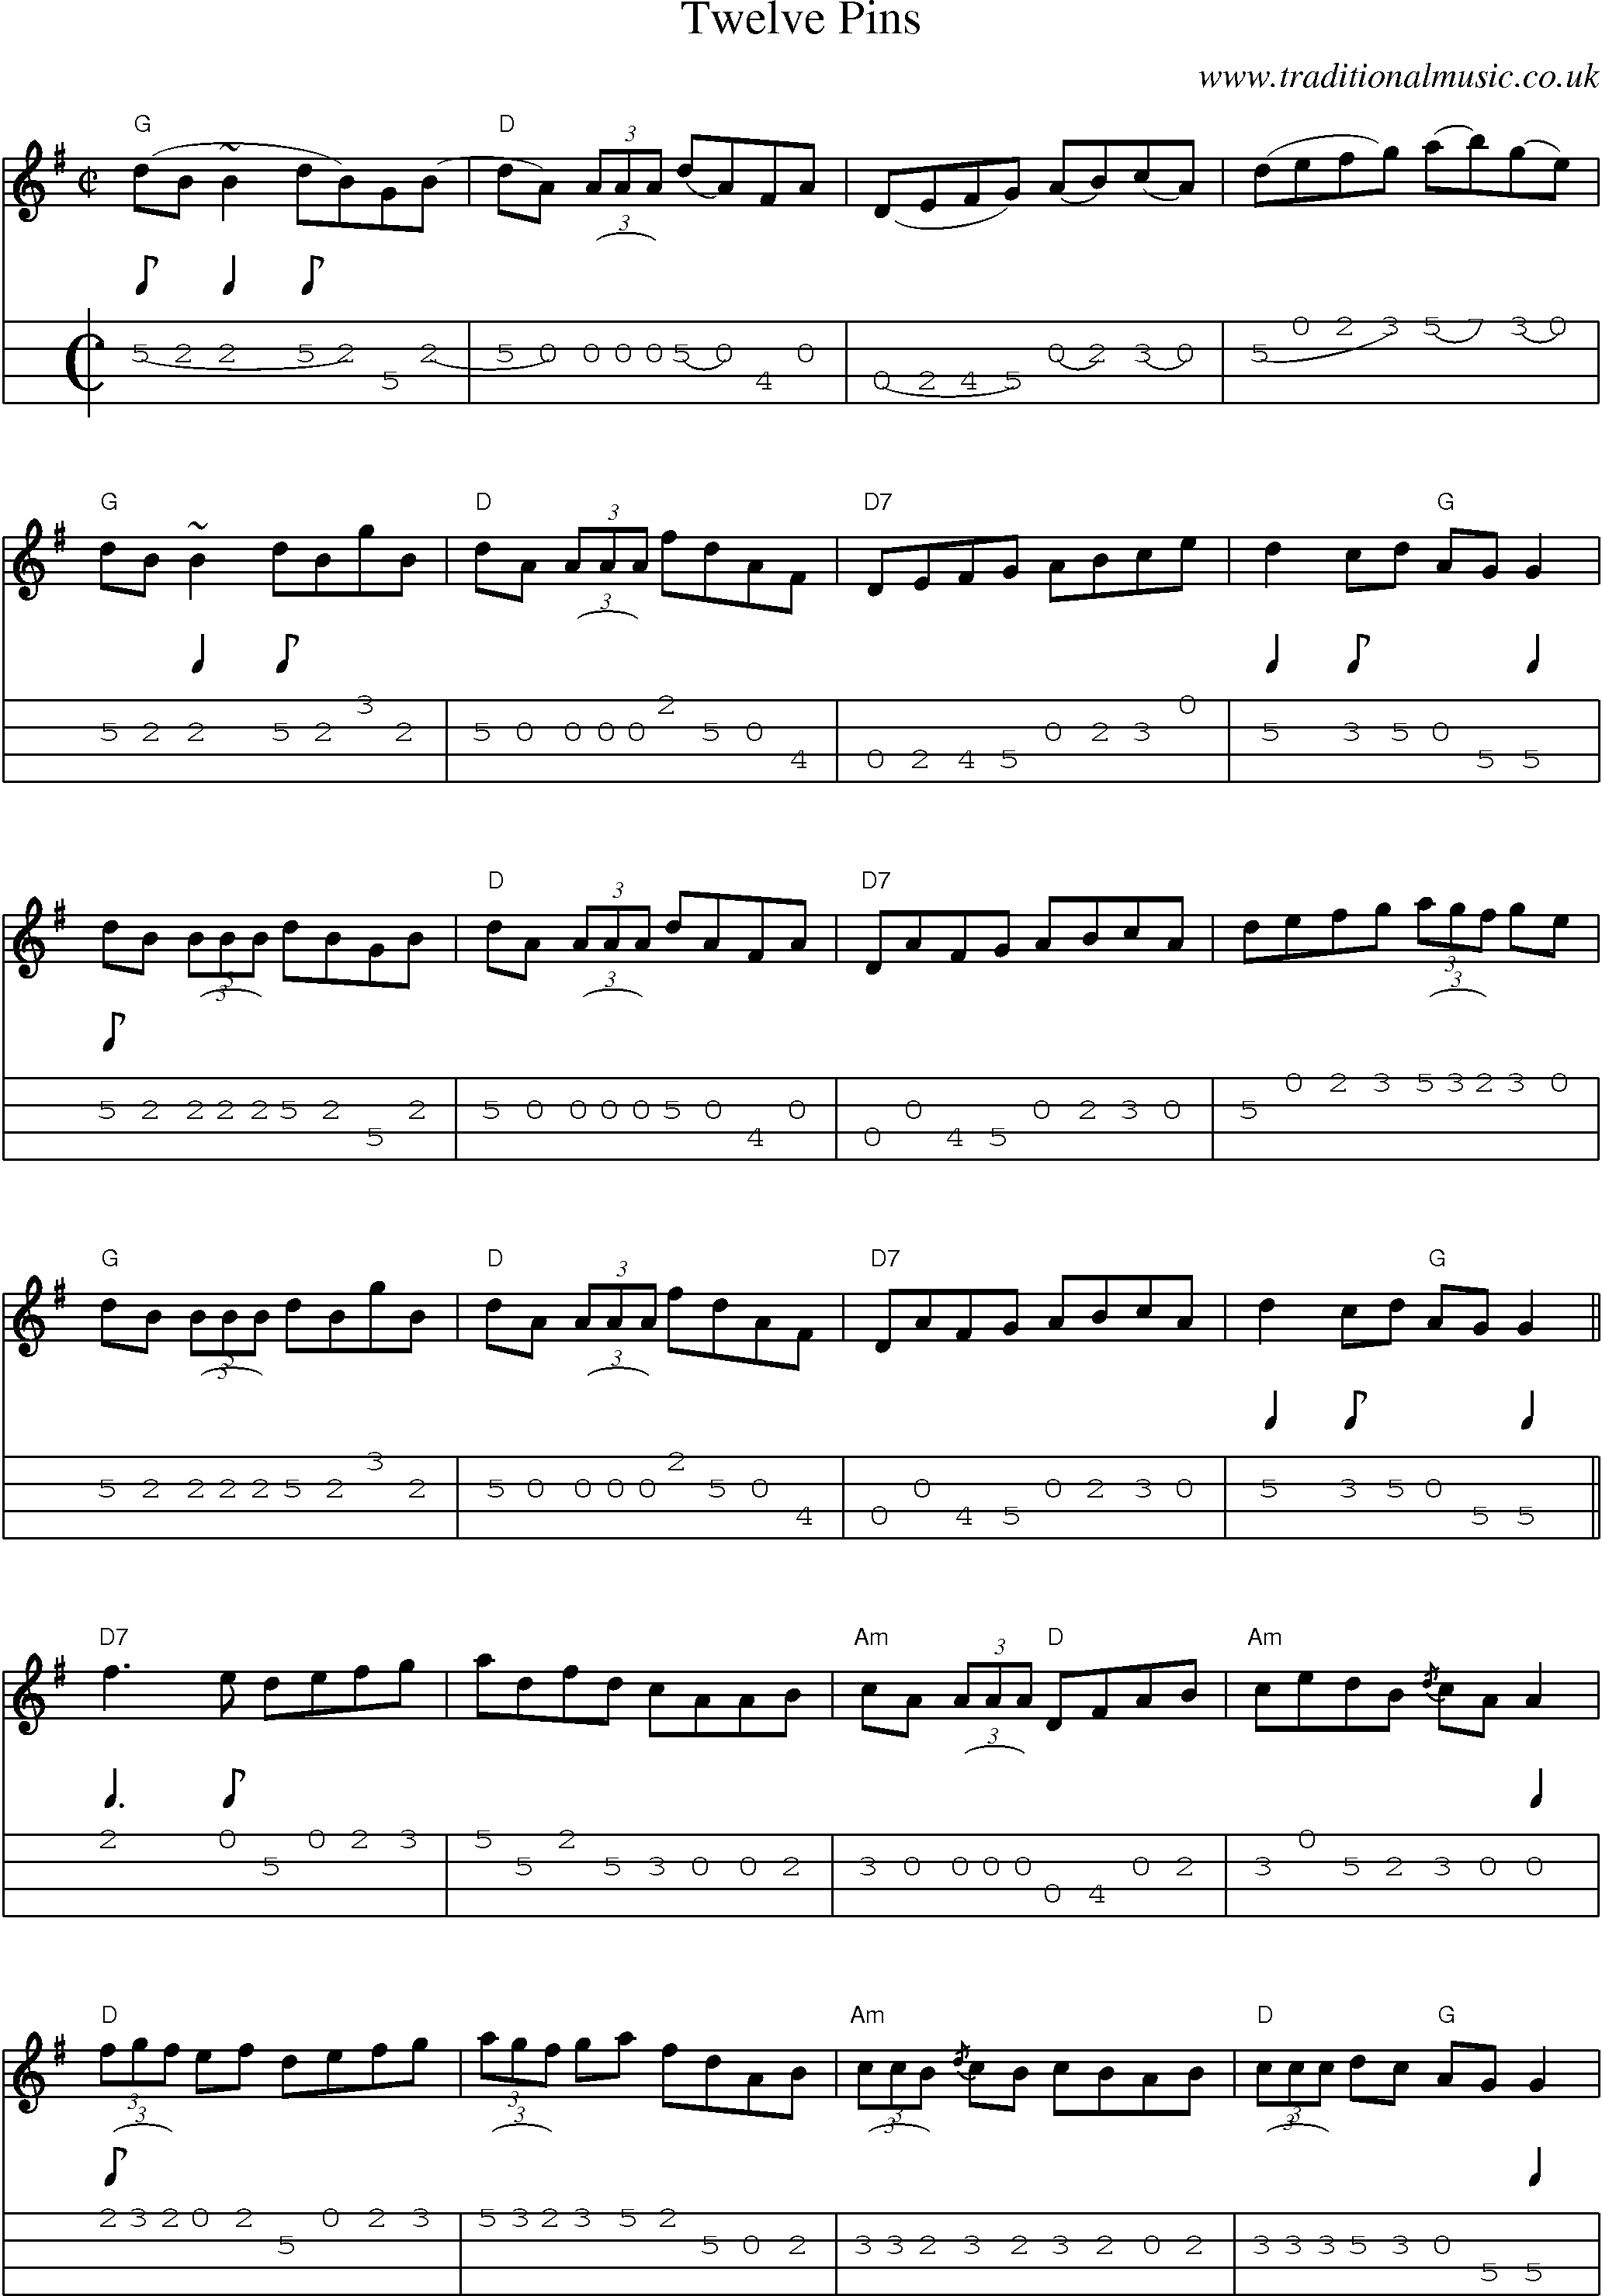 Music Score and Mandolin Tabs for Twelve Pins